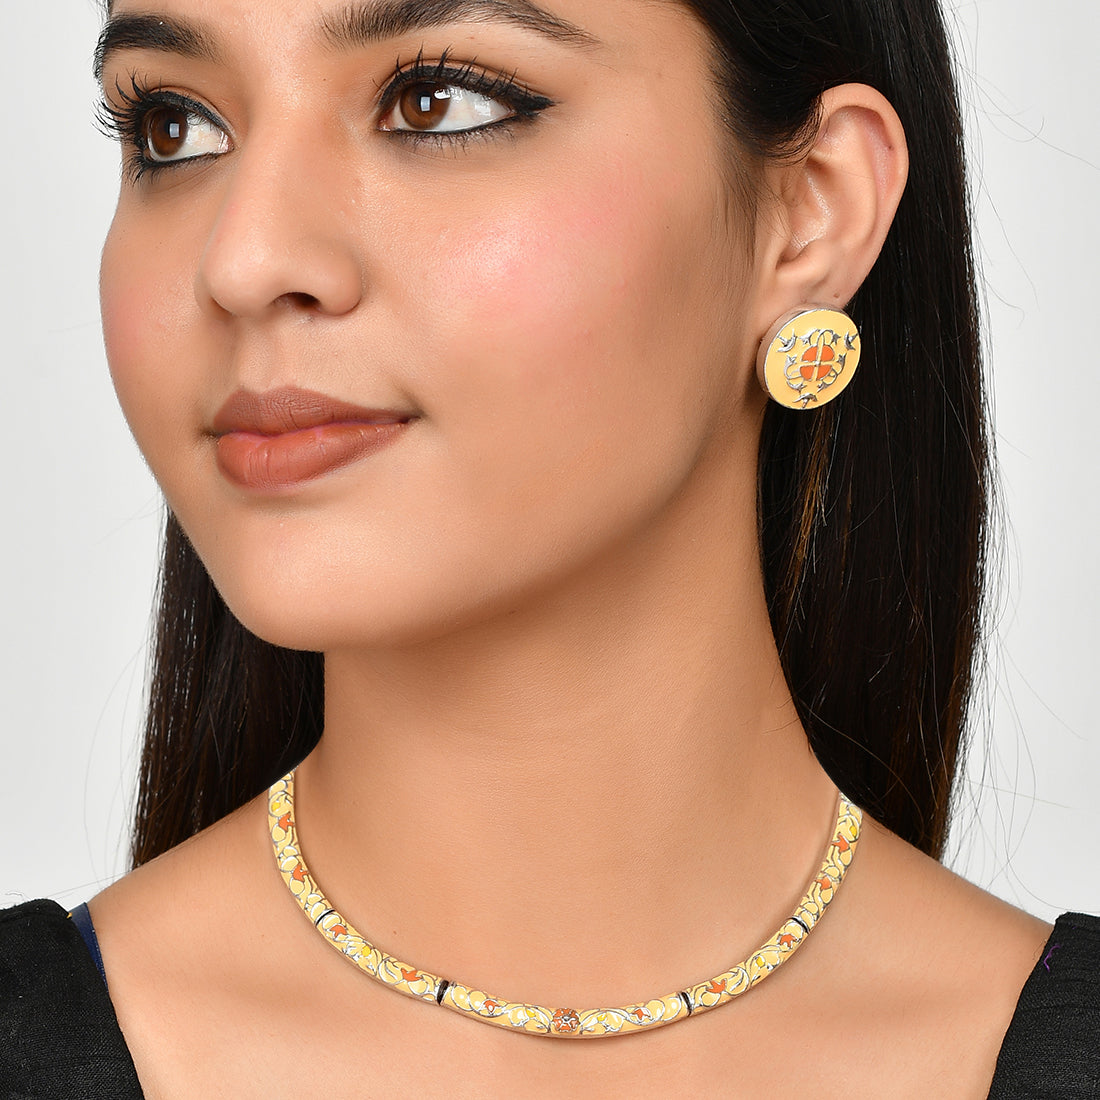 Women's Enameled Elegance Yellow Floral Gold-Plated Necklace Set - Voylla